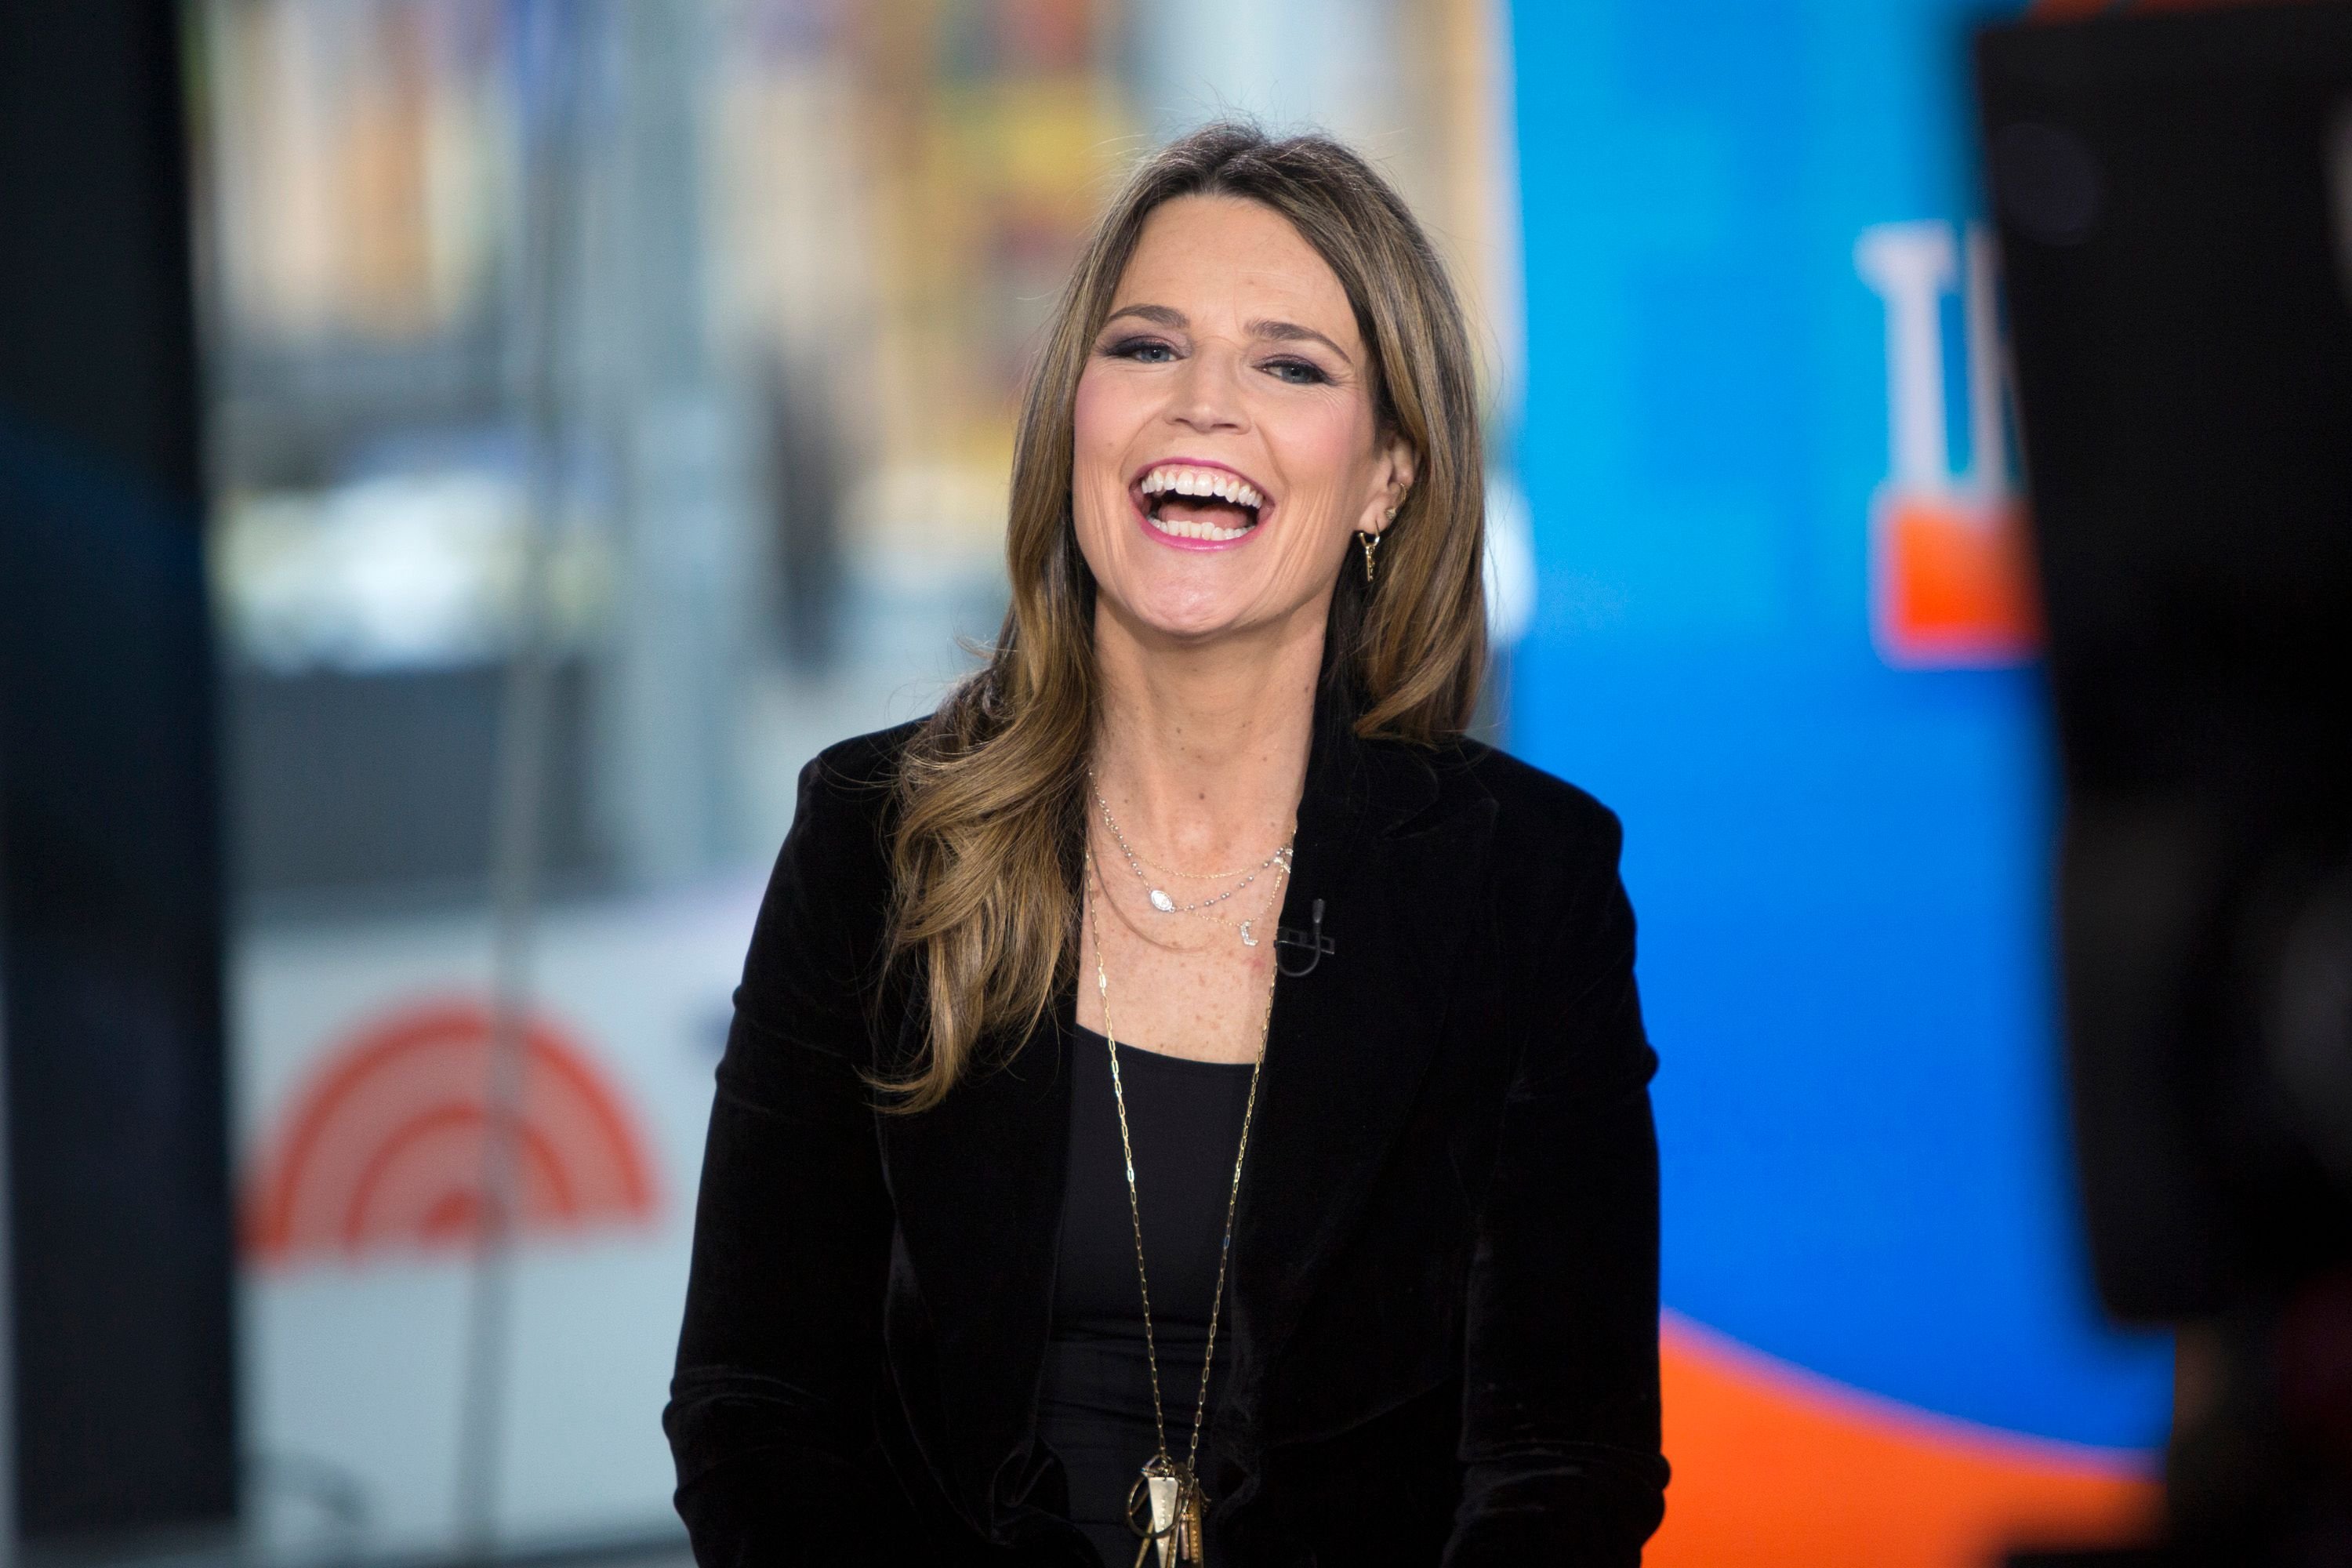 Savannah Guthrie on the set of the "Today" show on January 9, 2018 | Photo: Getty Images